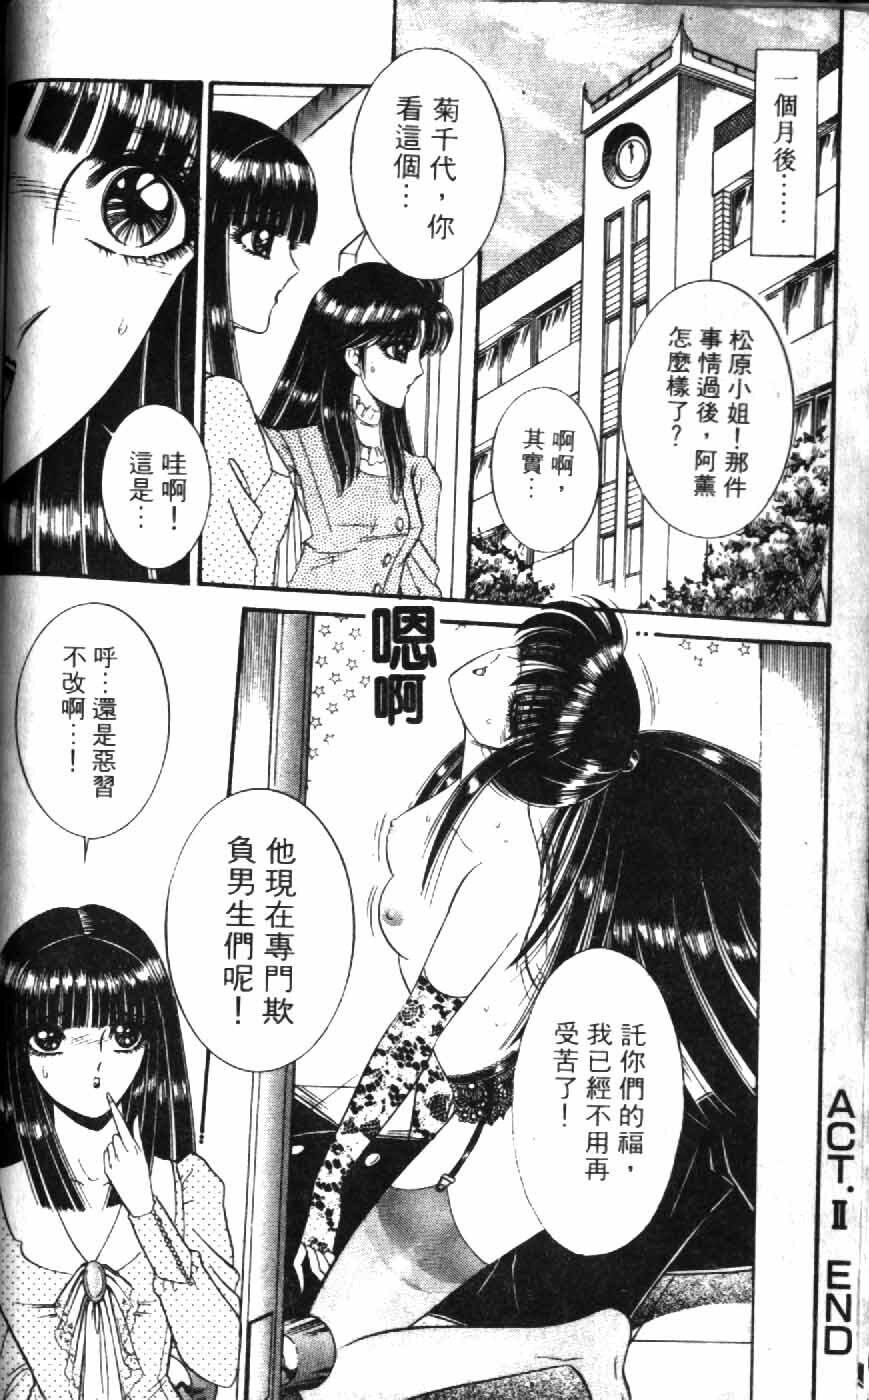 [Senno Knife] Ouma ga Horror Show 1 - Trans Sexual Special Show 1 | 顫慄博覽會 1 [Chinese] page 46 full